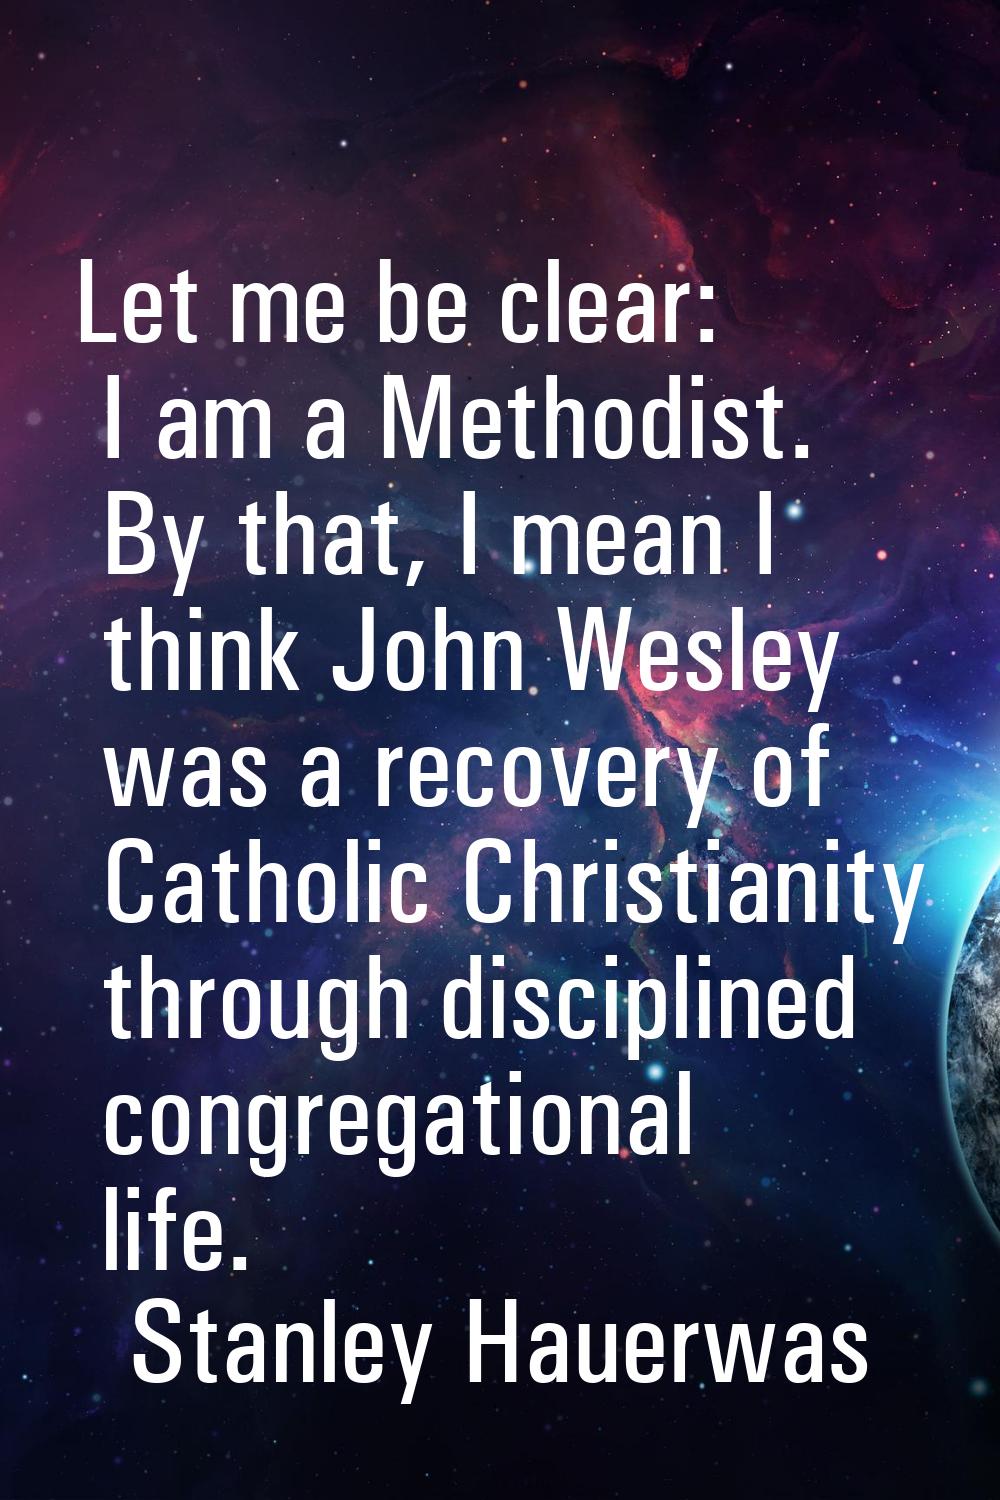 Let me be clear: I am a Methodist. By that, I mean I think John Wesley was a recovery of Catholic C